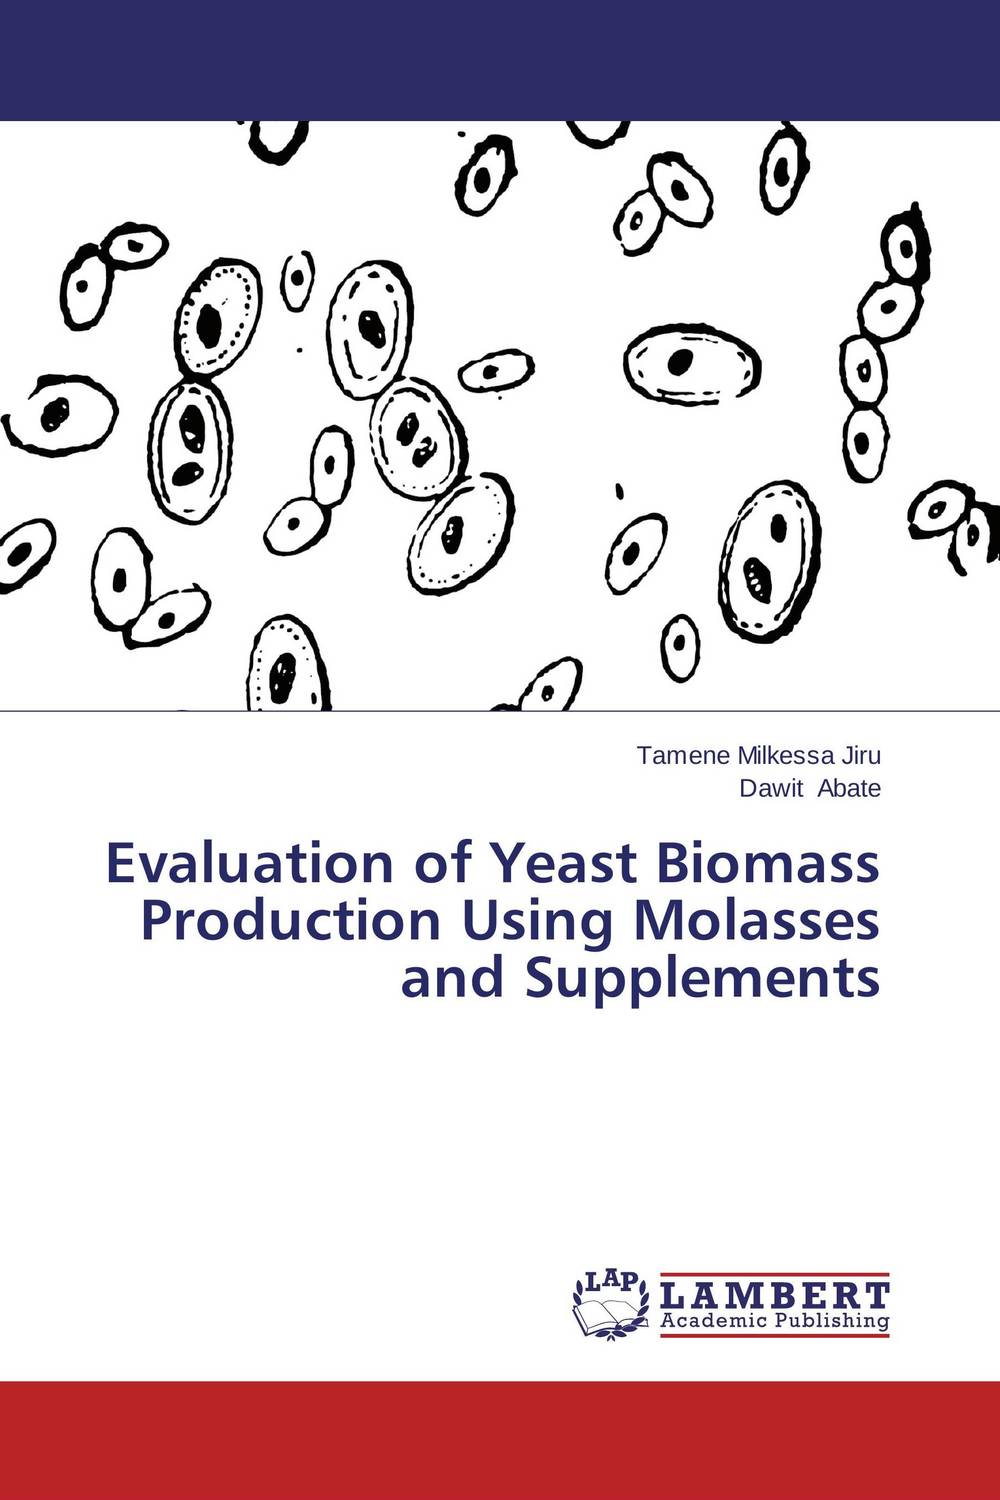 Evaluation of Yeast Biomass Production Using Molasses and Supplements